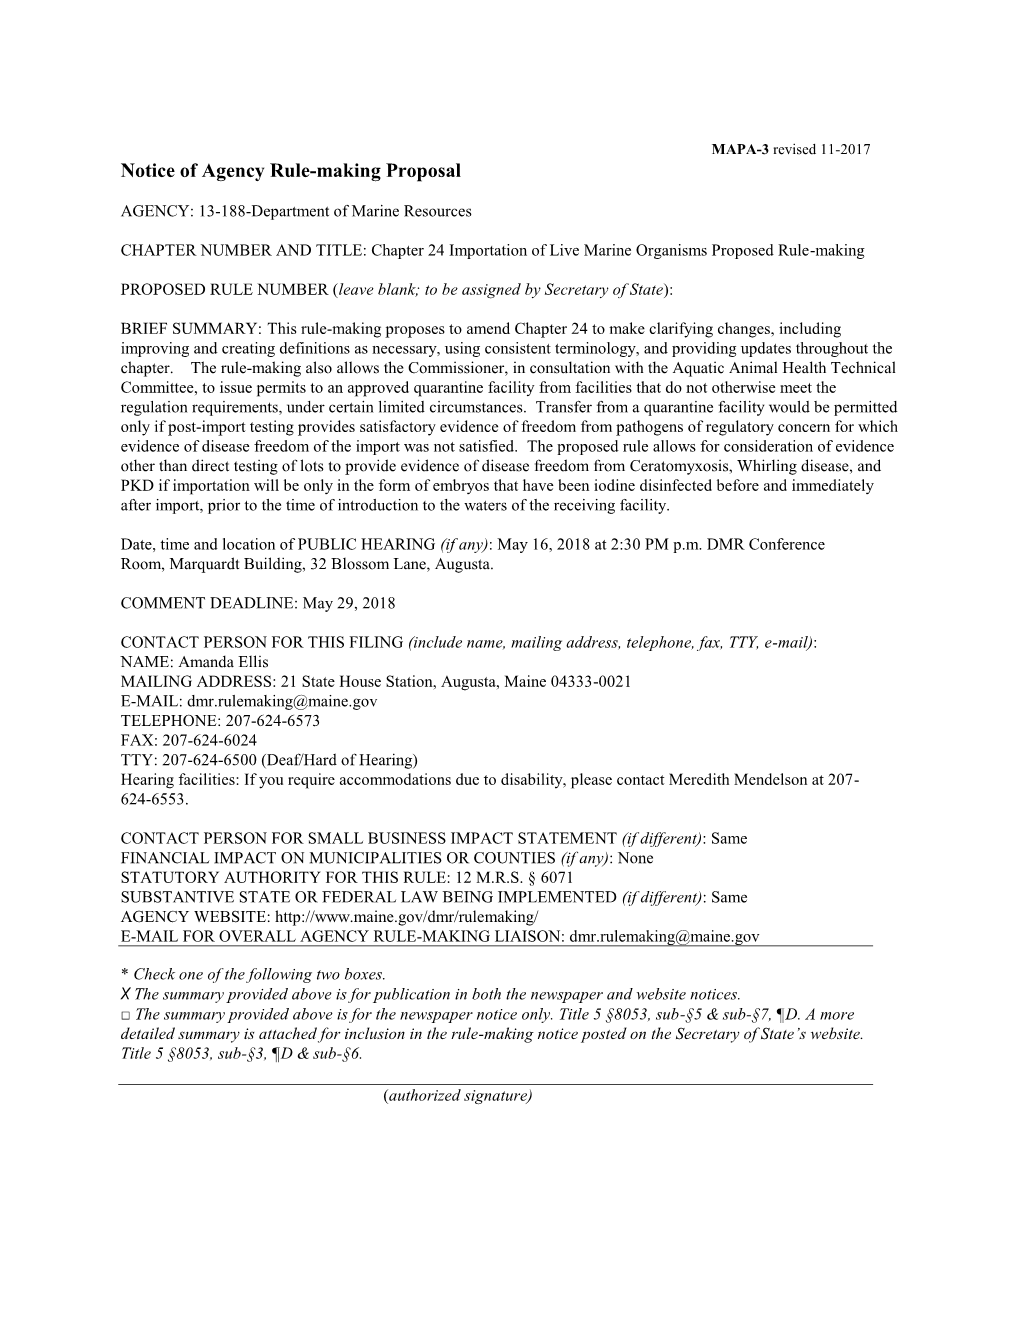 Notice of Agency Rulemaking Proposal – Chapter 24 Importation